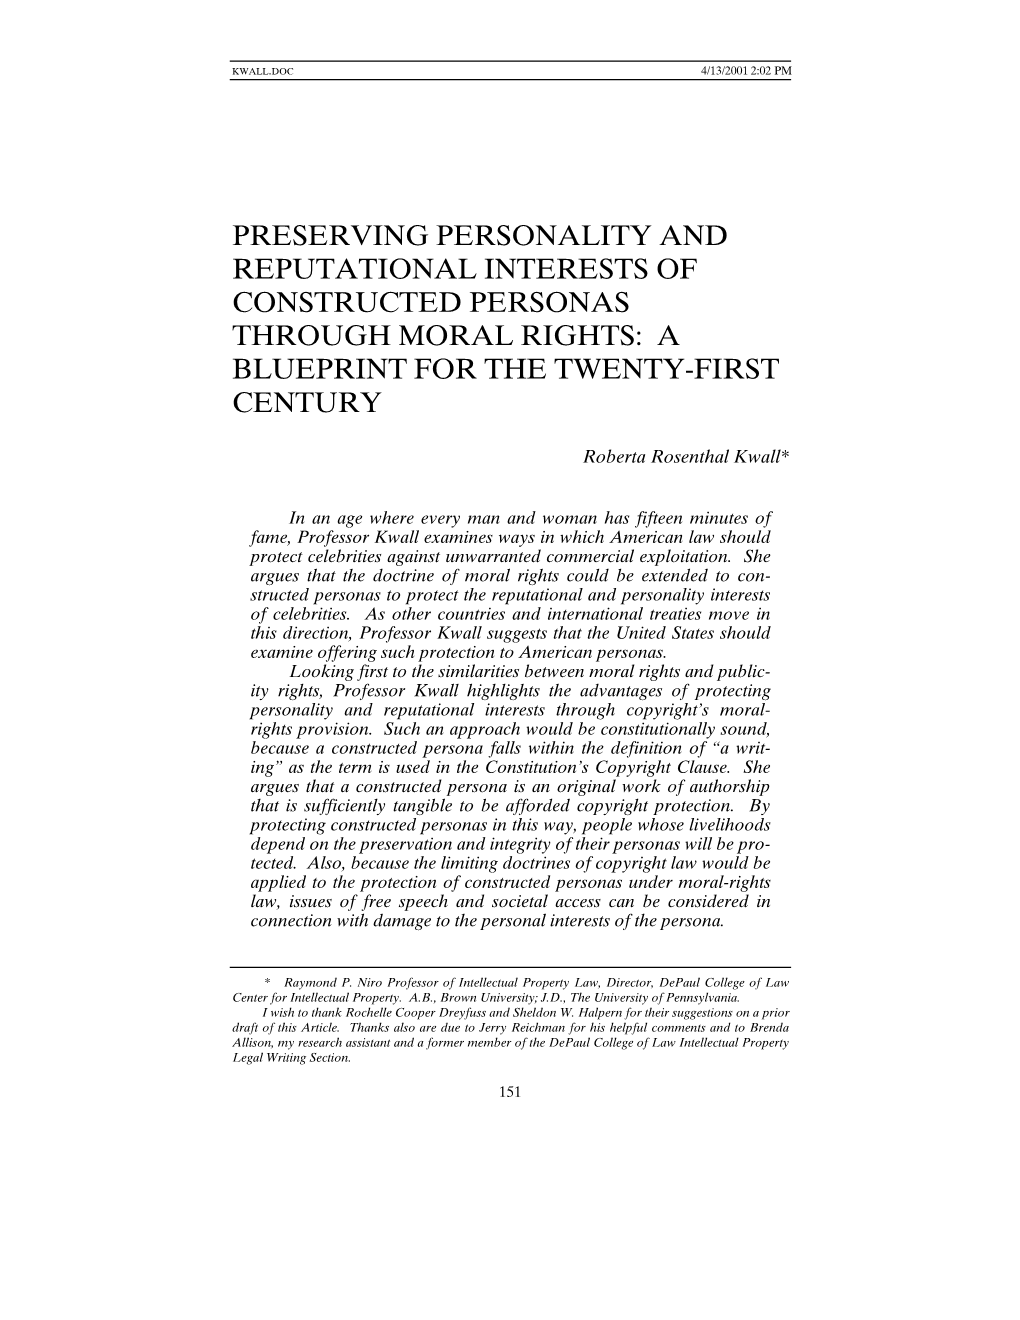 Preserving Personality and Reputational Interests of Constructed Personas Through Moral Rights: a Blueprint for the Twenty-First Century